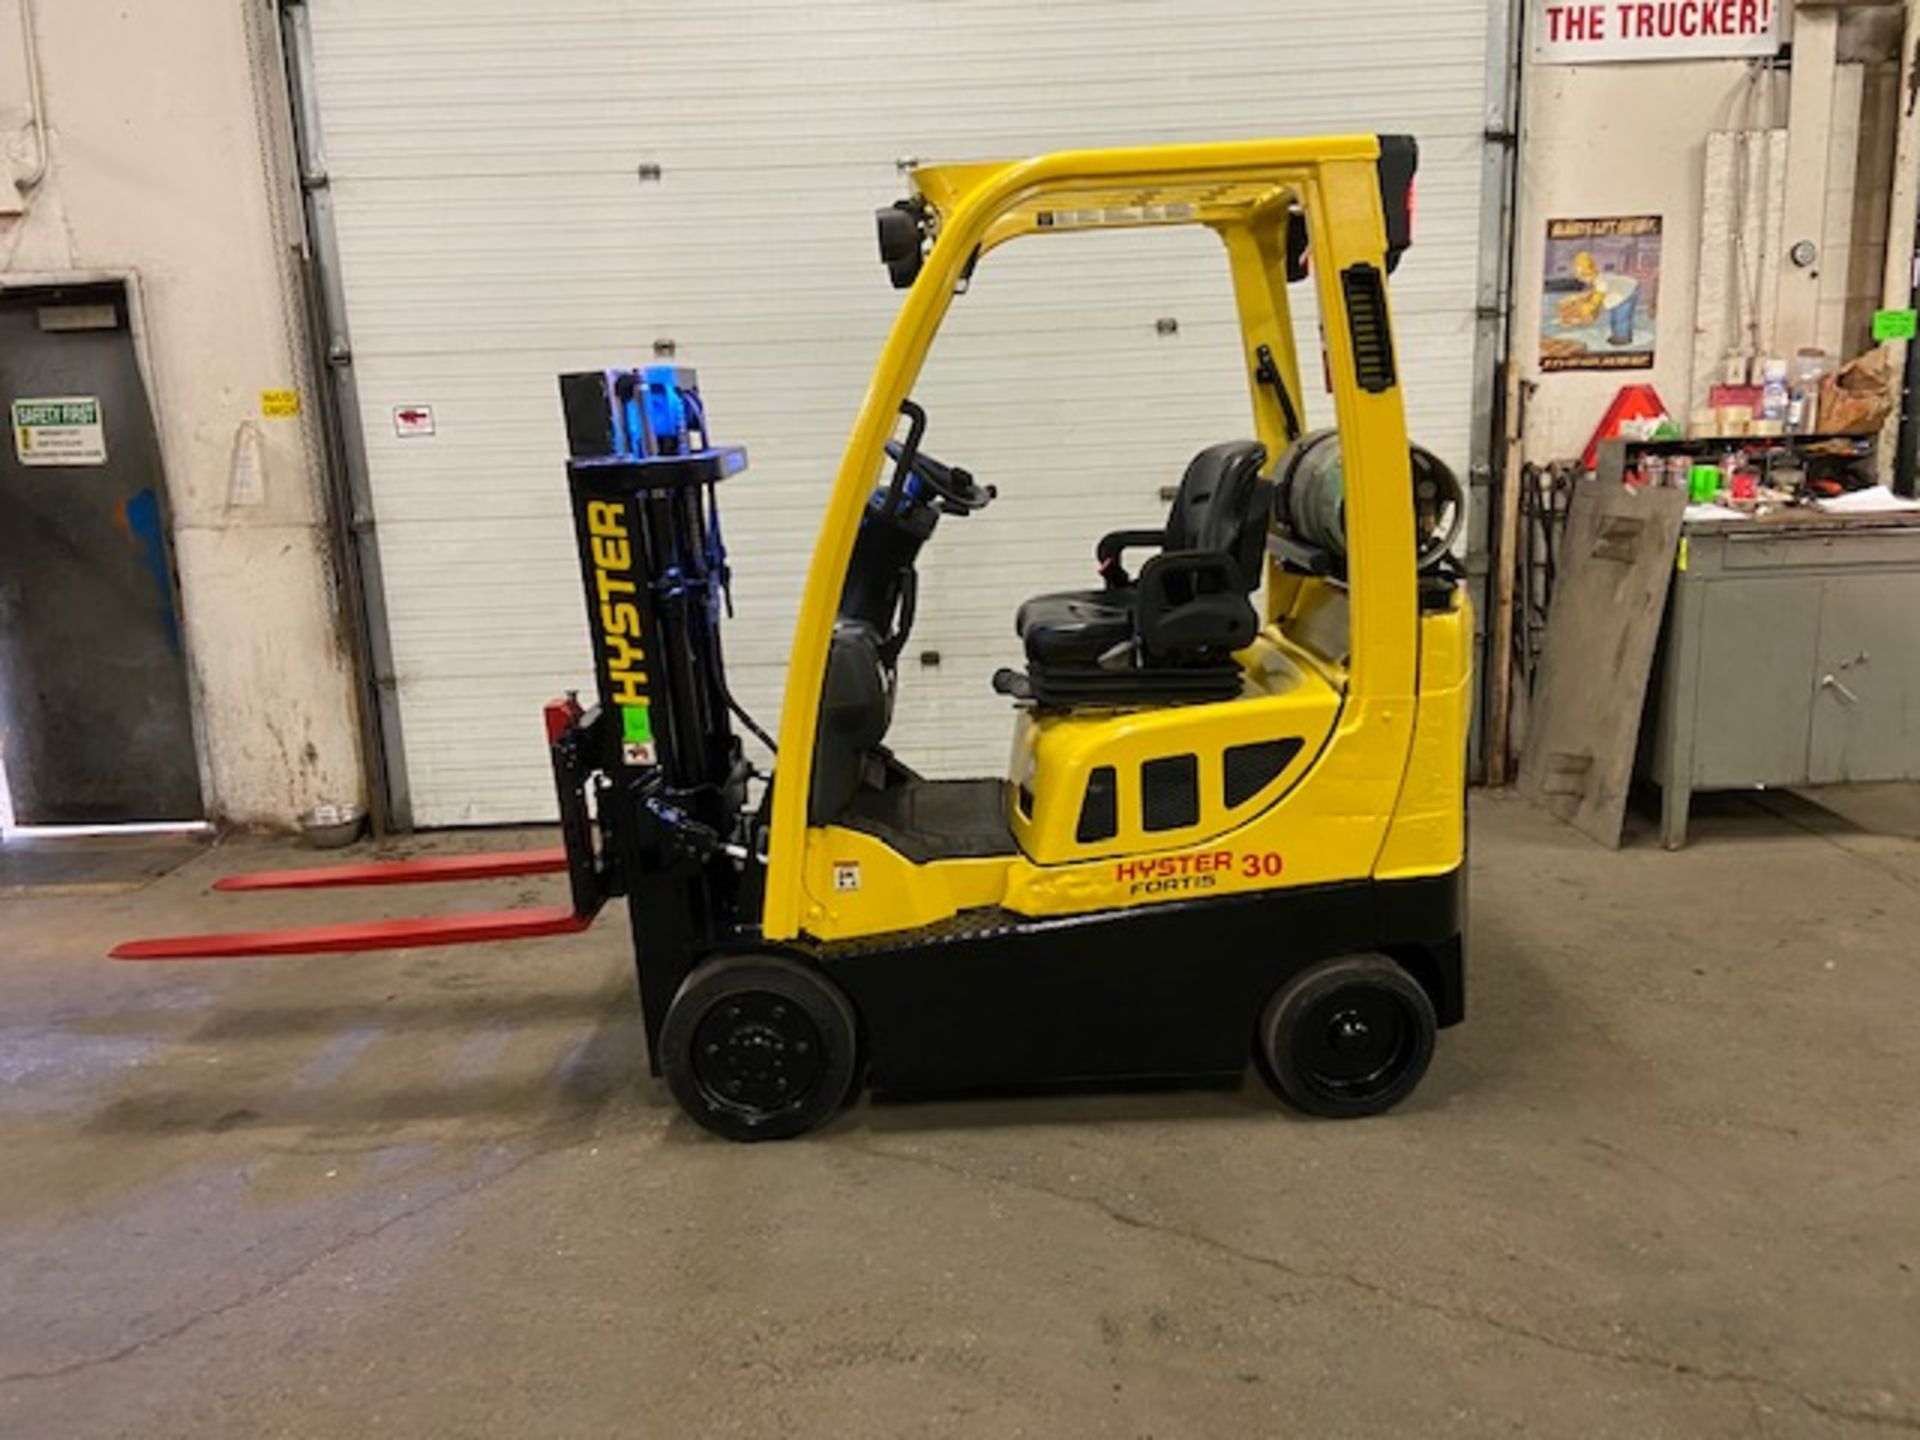 FREE CUSTOMS - 2015 Hyster 3000lbs Capacity Forklift LPG (propane) with sideshift (no propane tank